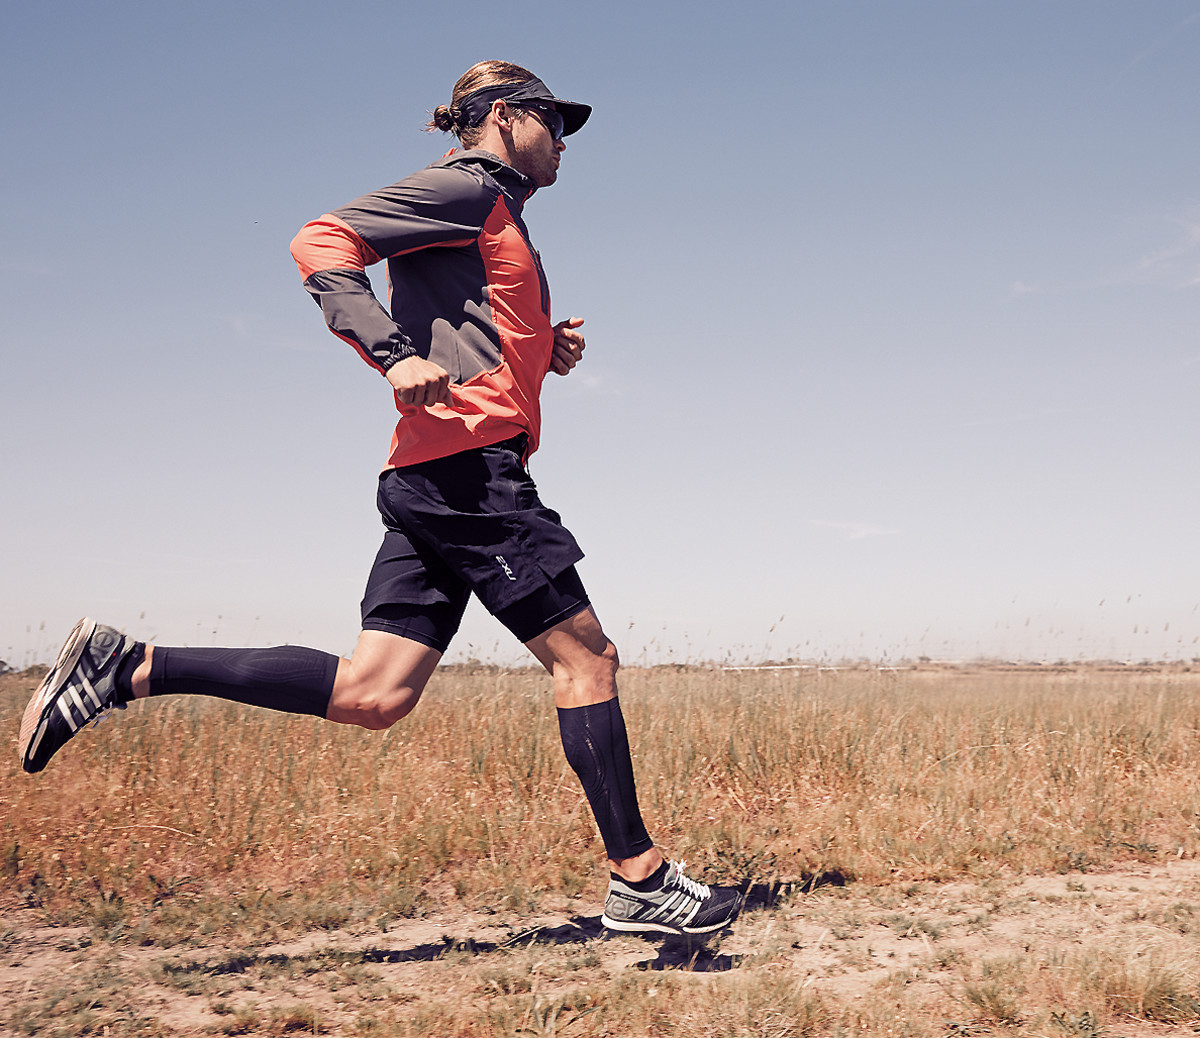 The greatest pieces of compression gear to supercharge athletic